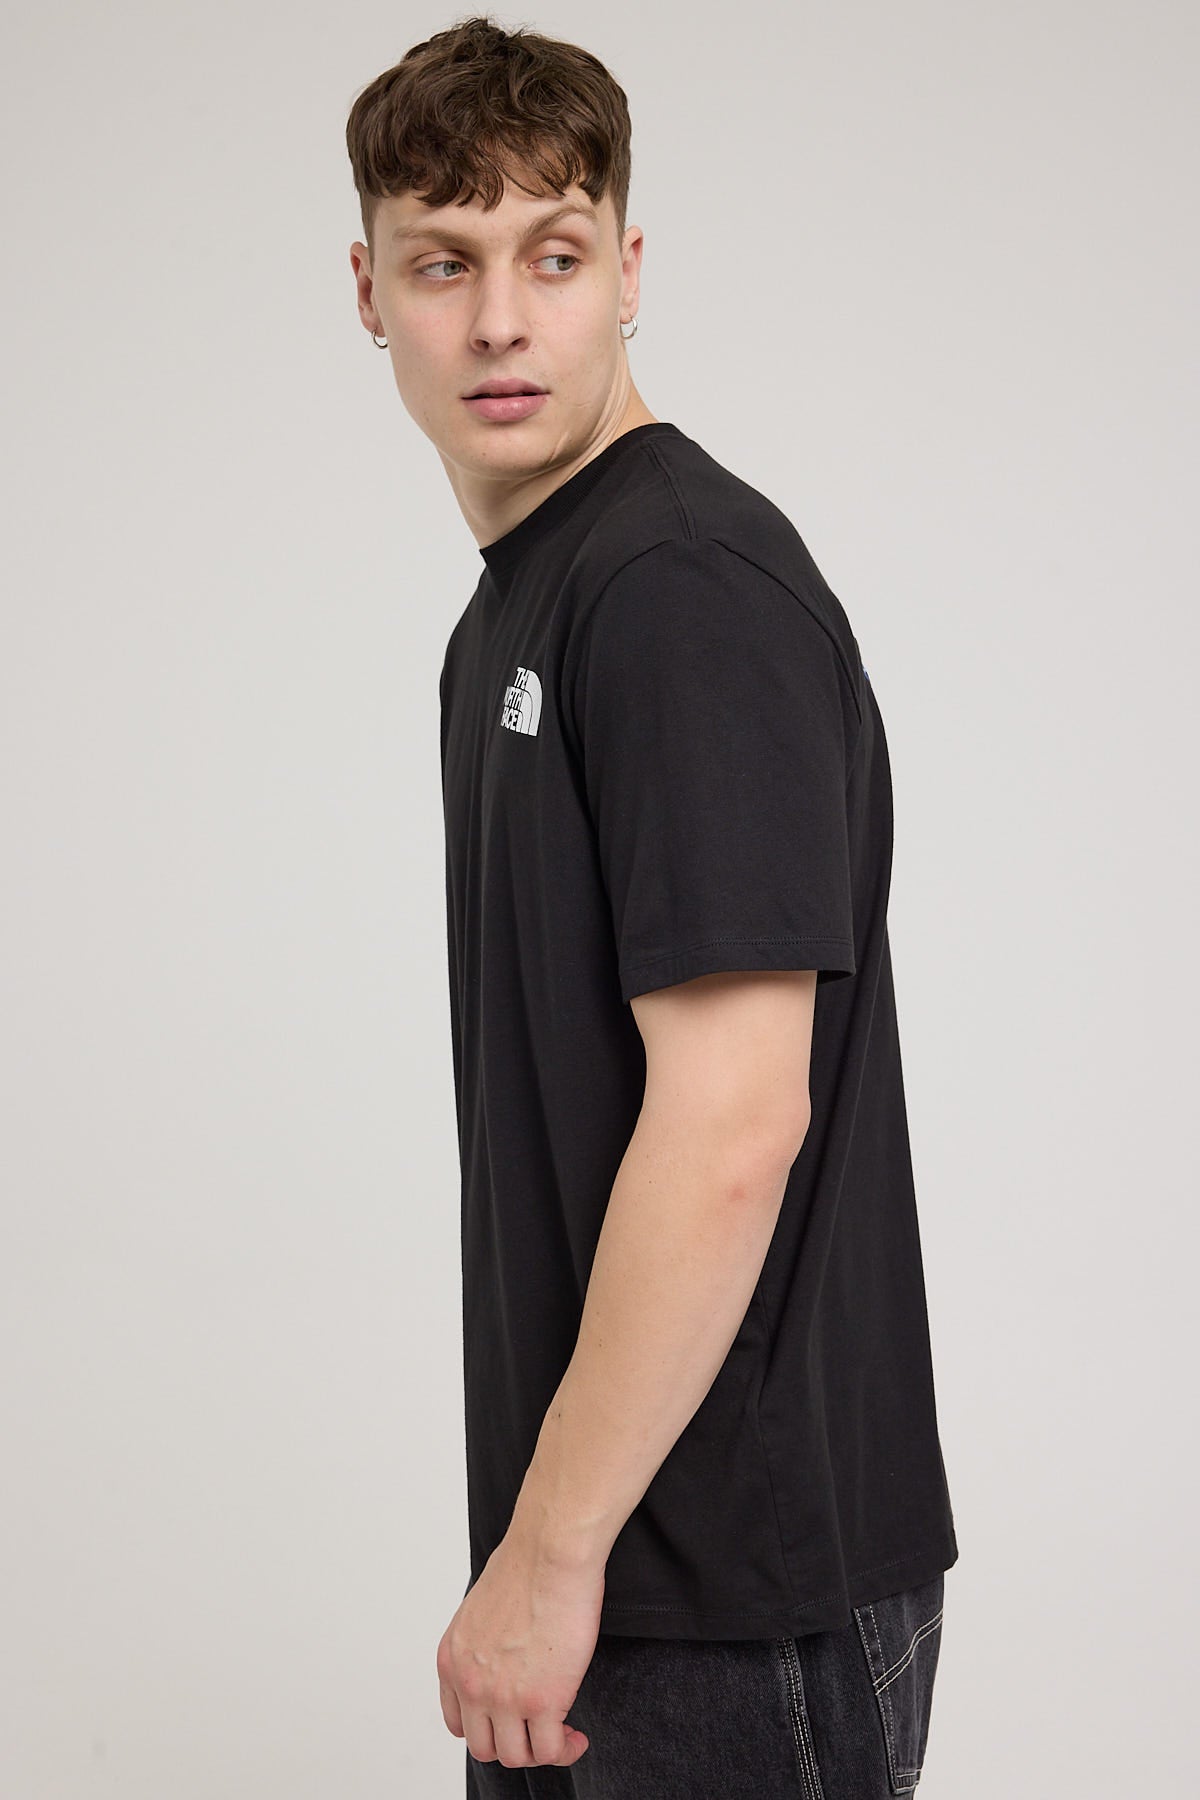 The North Face Placed We Love Tee Black/White